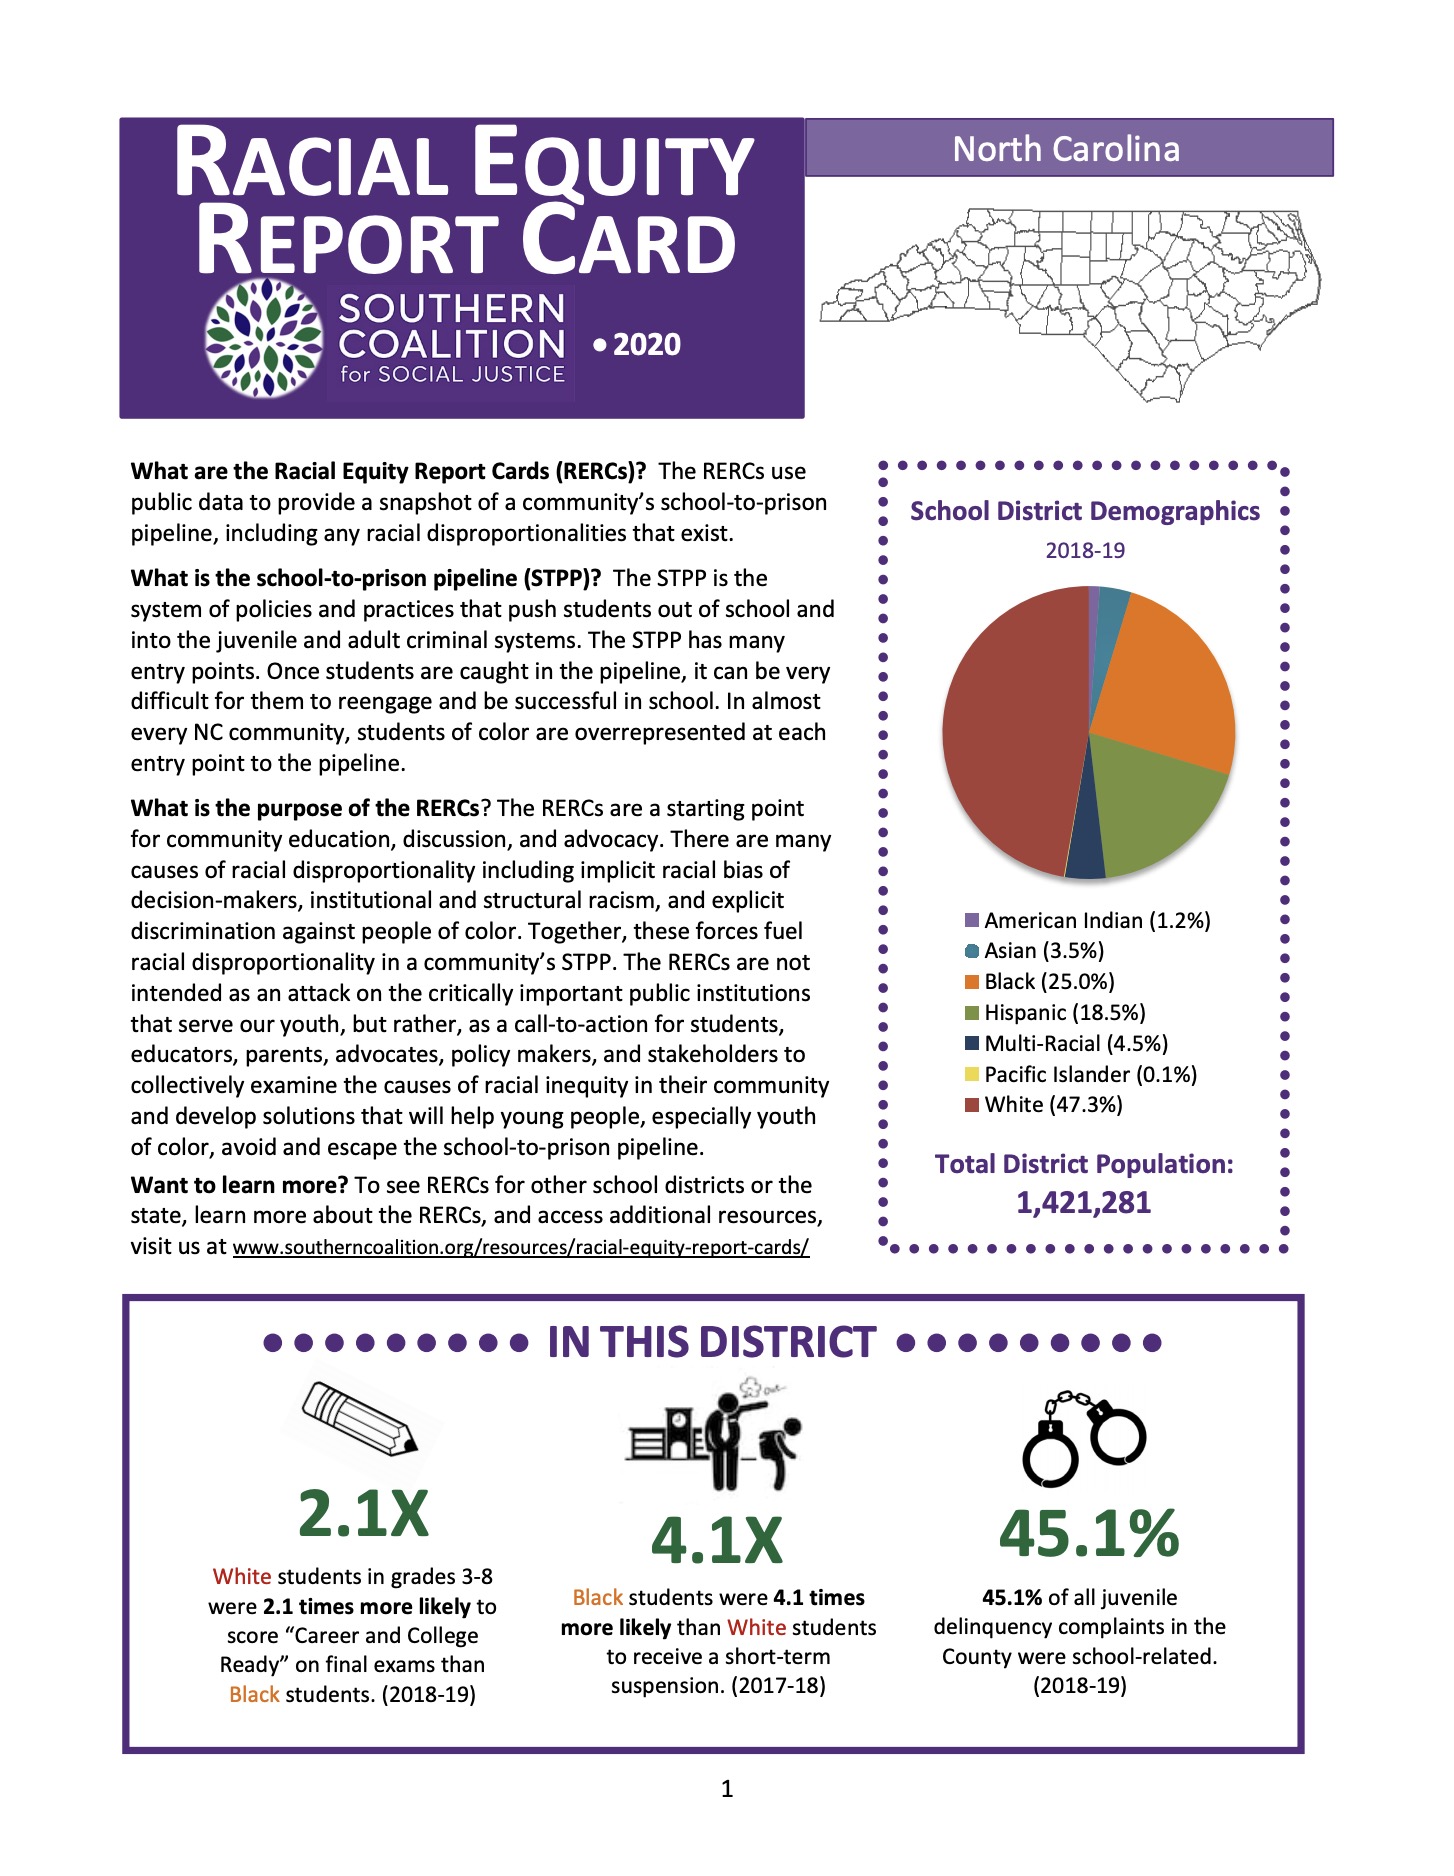 racial-equity-report-cards